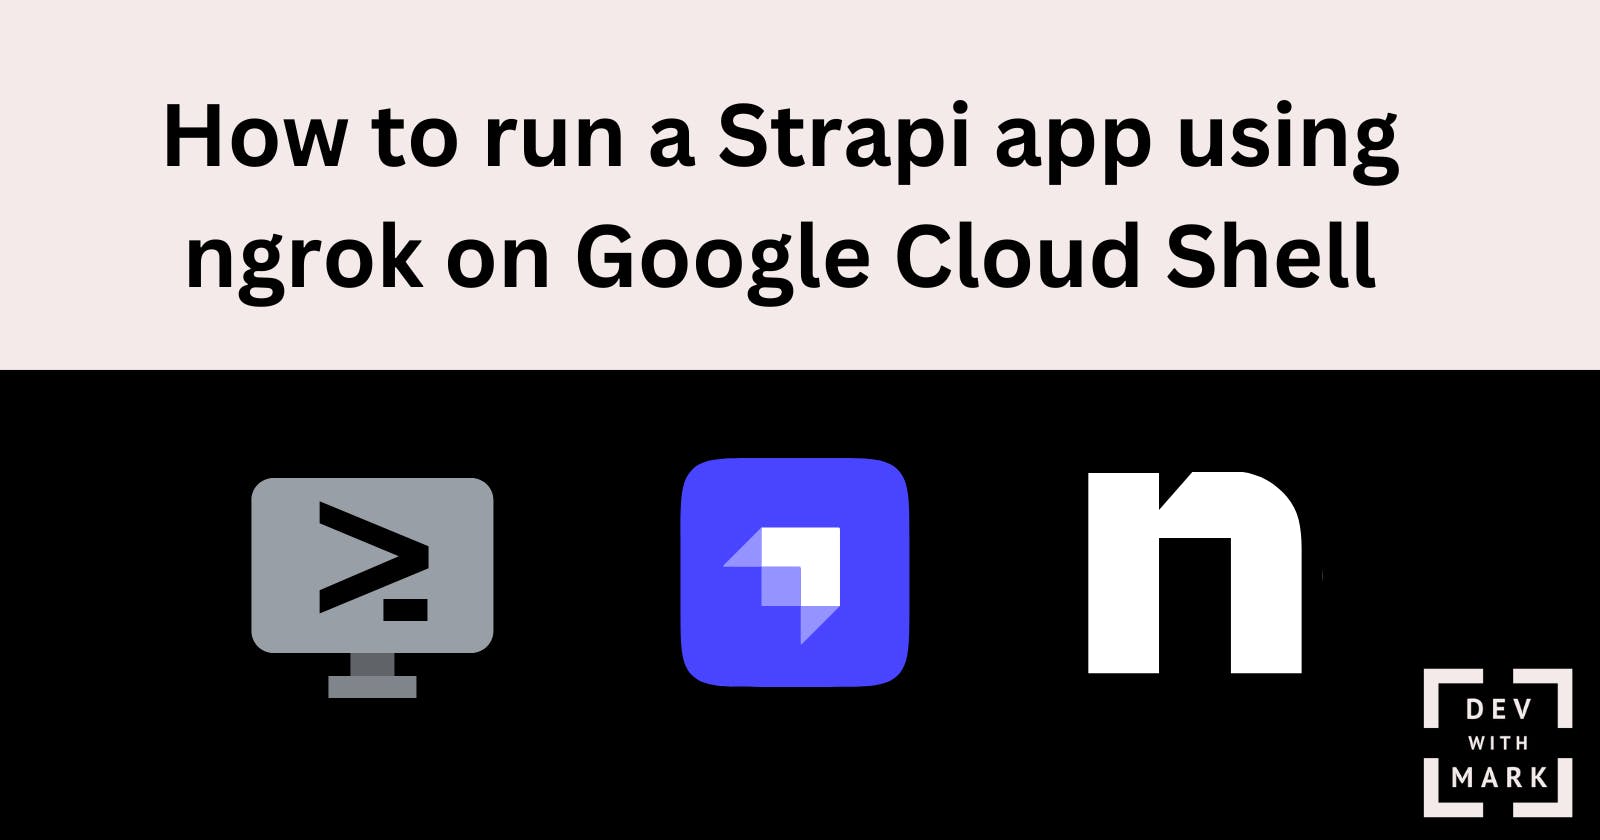 How to run a Strapi app using ngrok on Google Cloud Shell